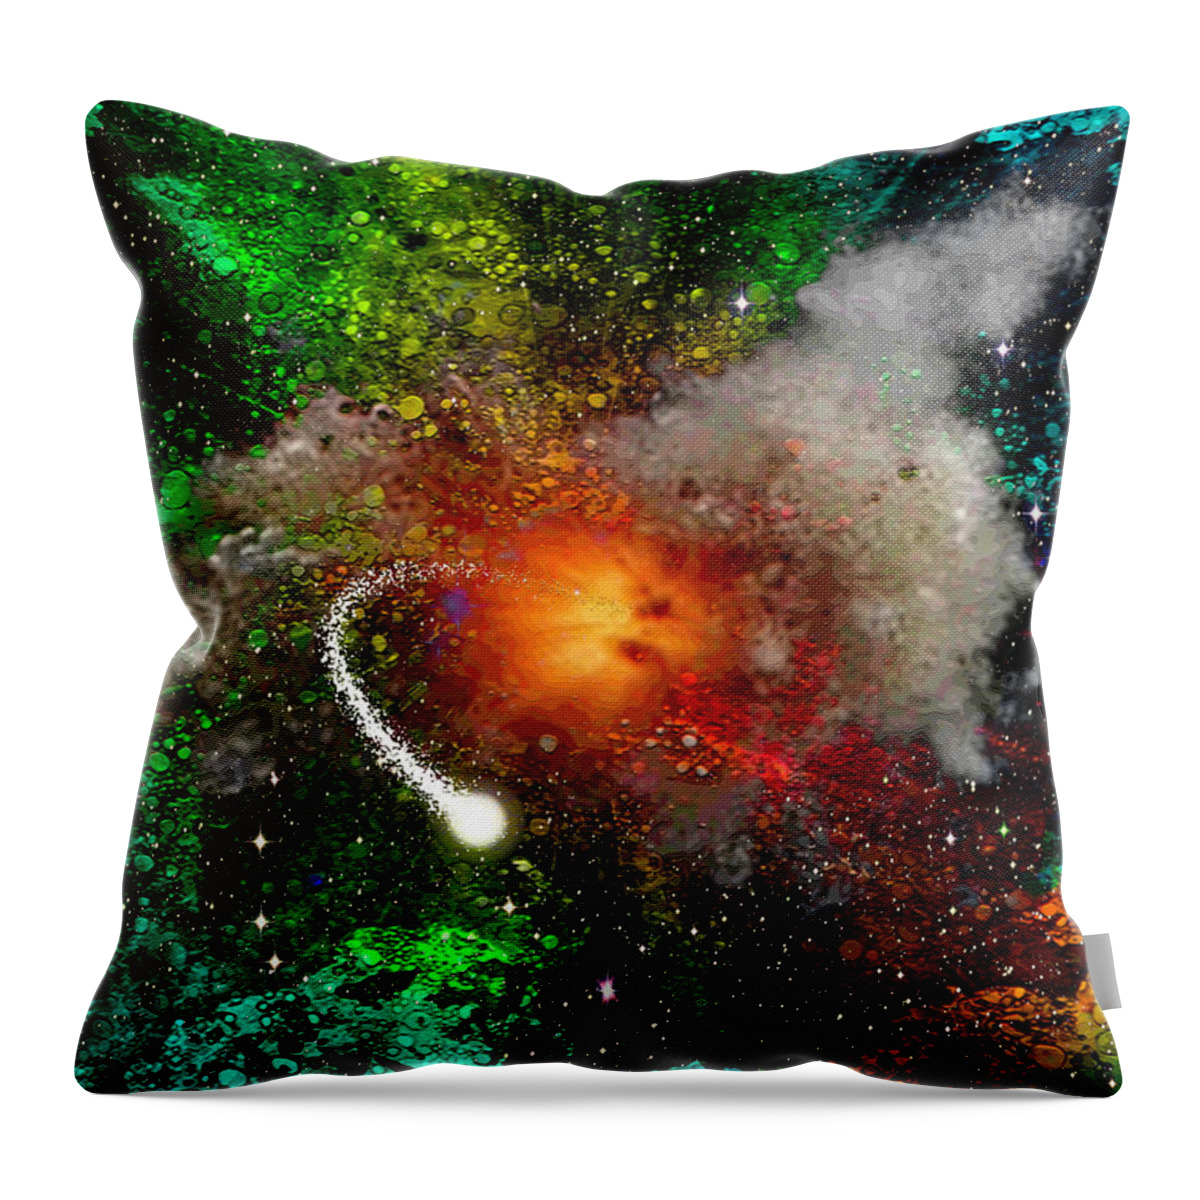 Abstract Throw Pillow featuring the digital art Escape by Don White Artdreamer